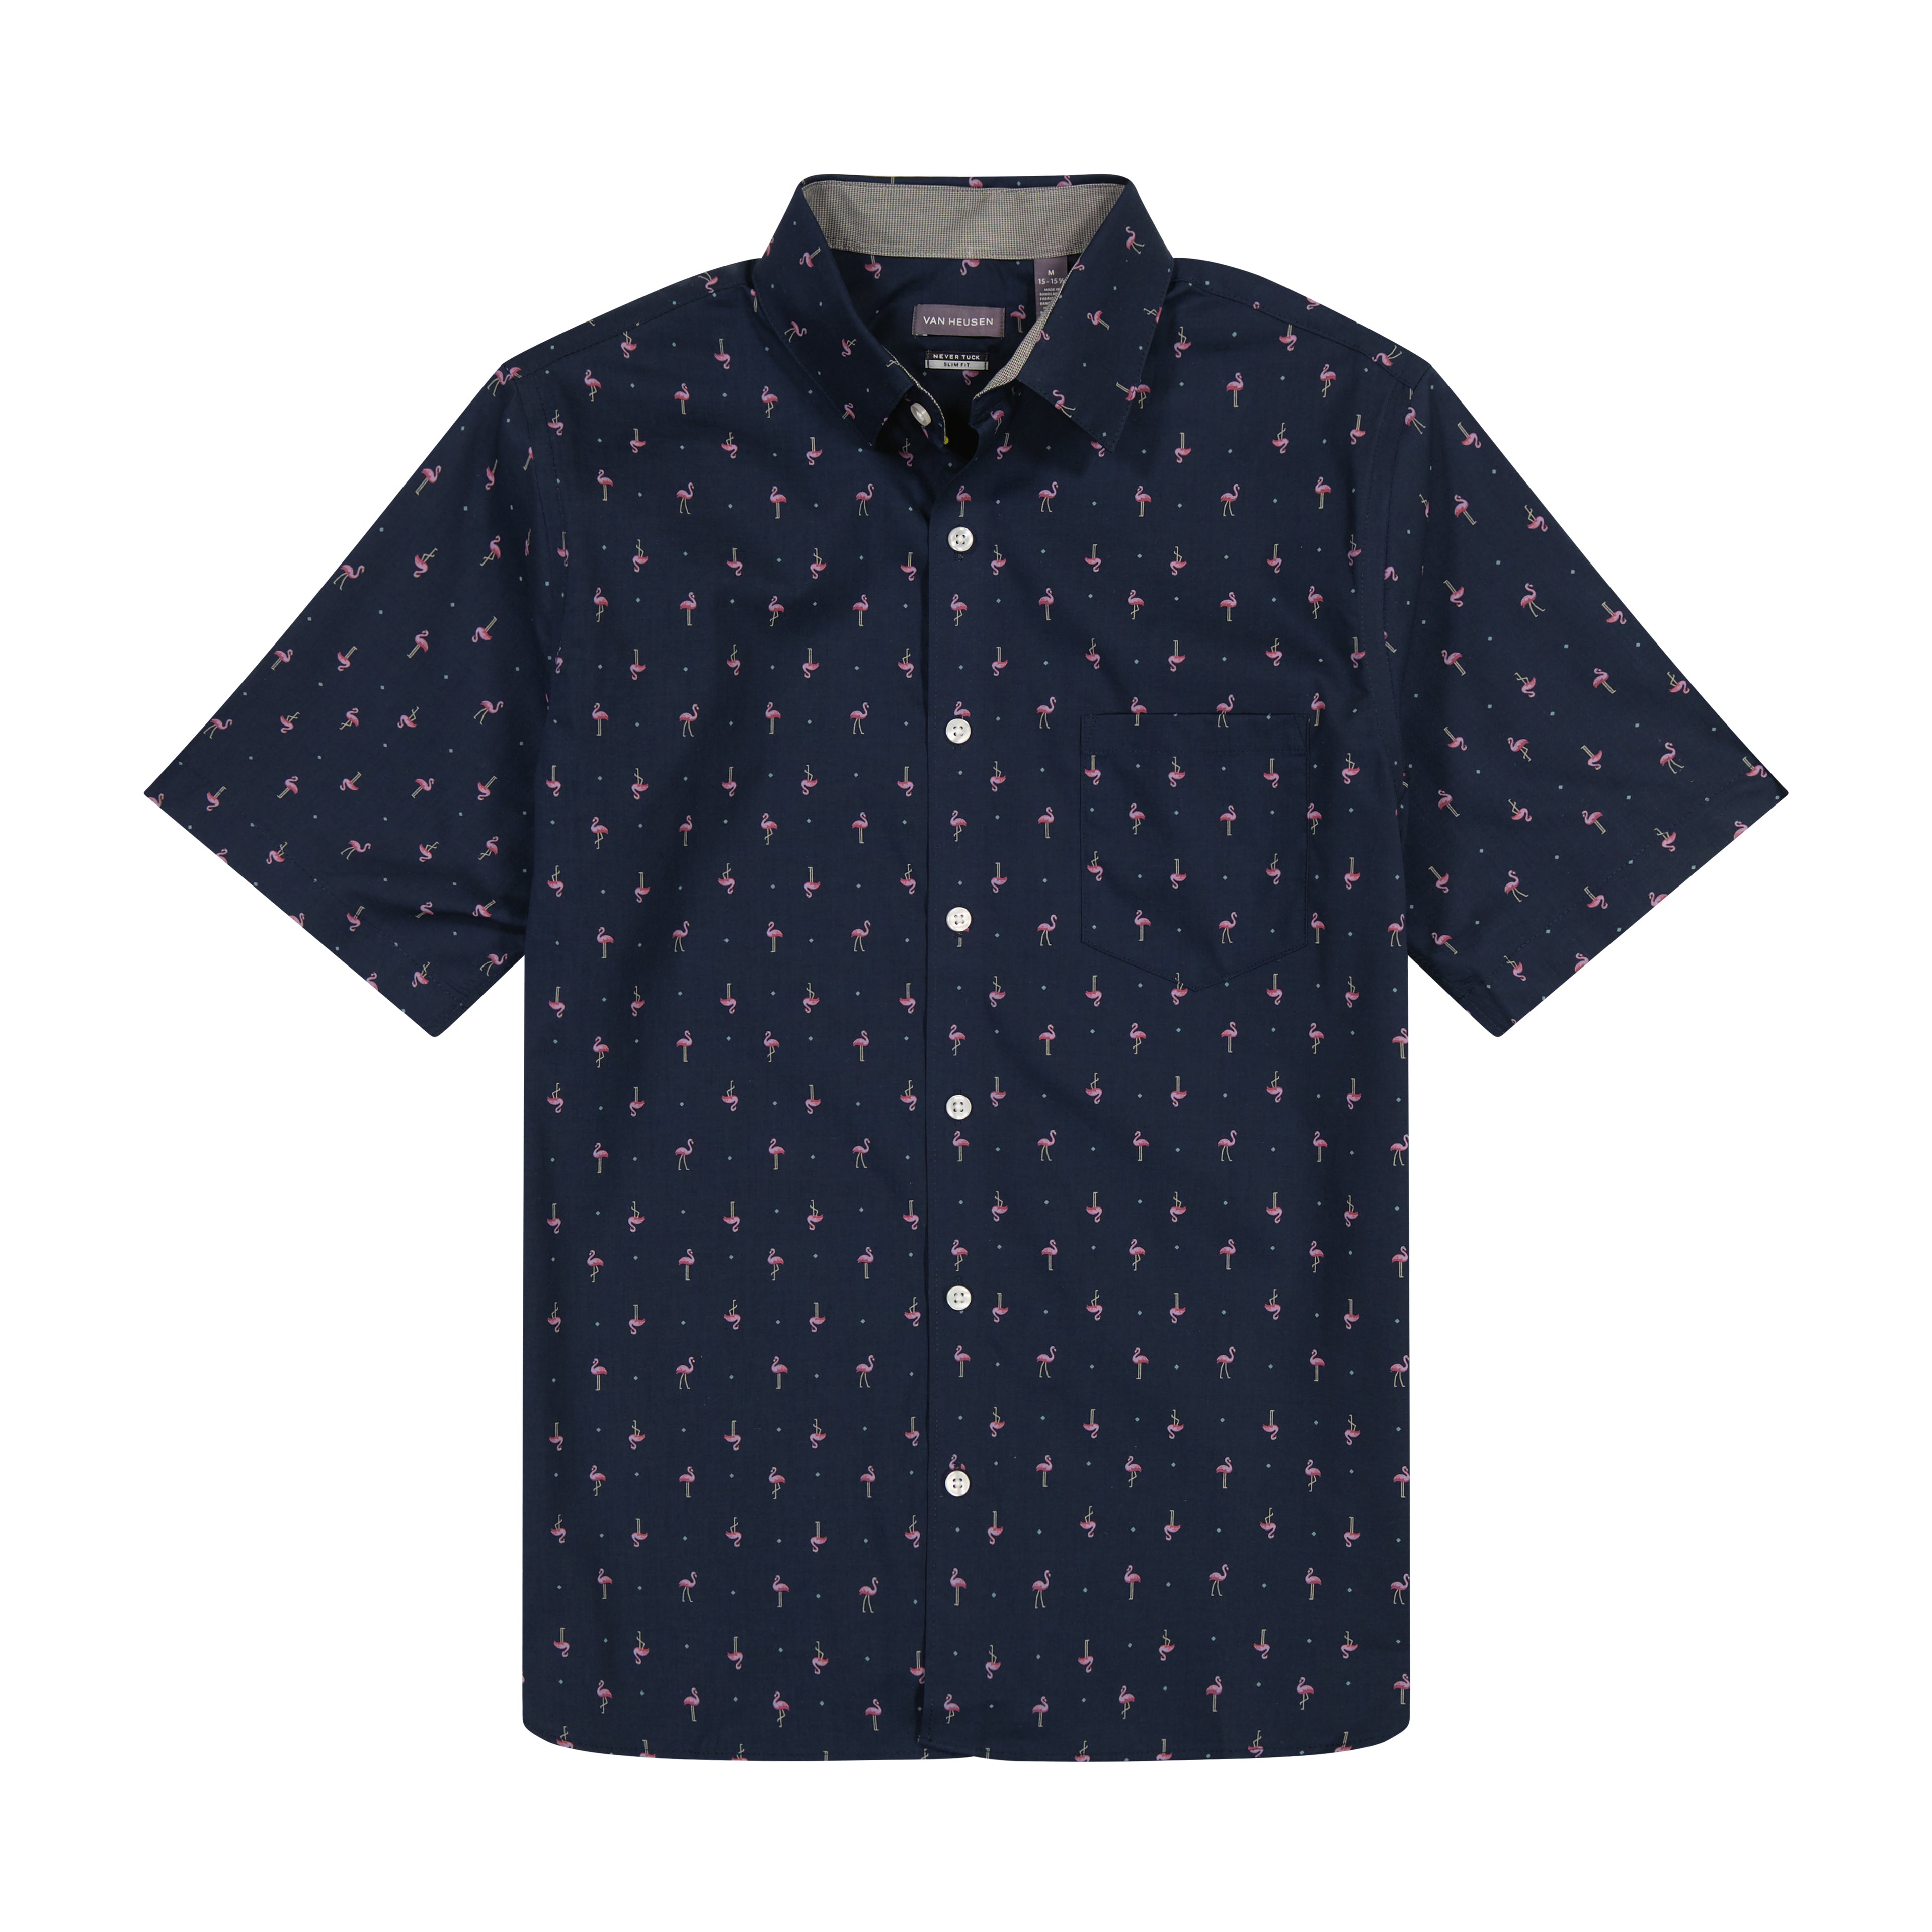 Essential Stain Shield Woven All Over Print Short Sleeve Shirt - Slim Fit